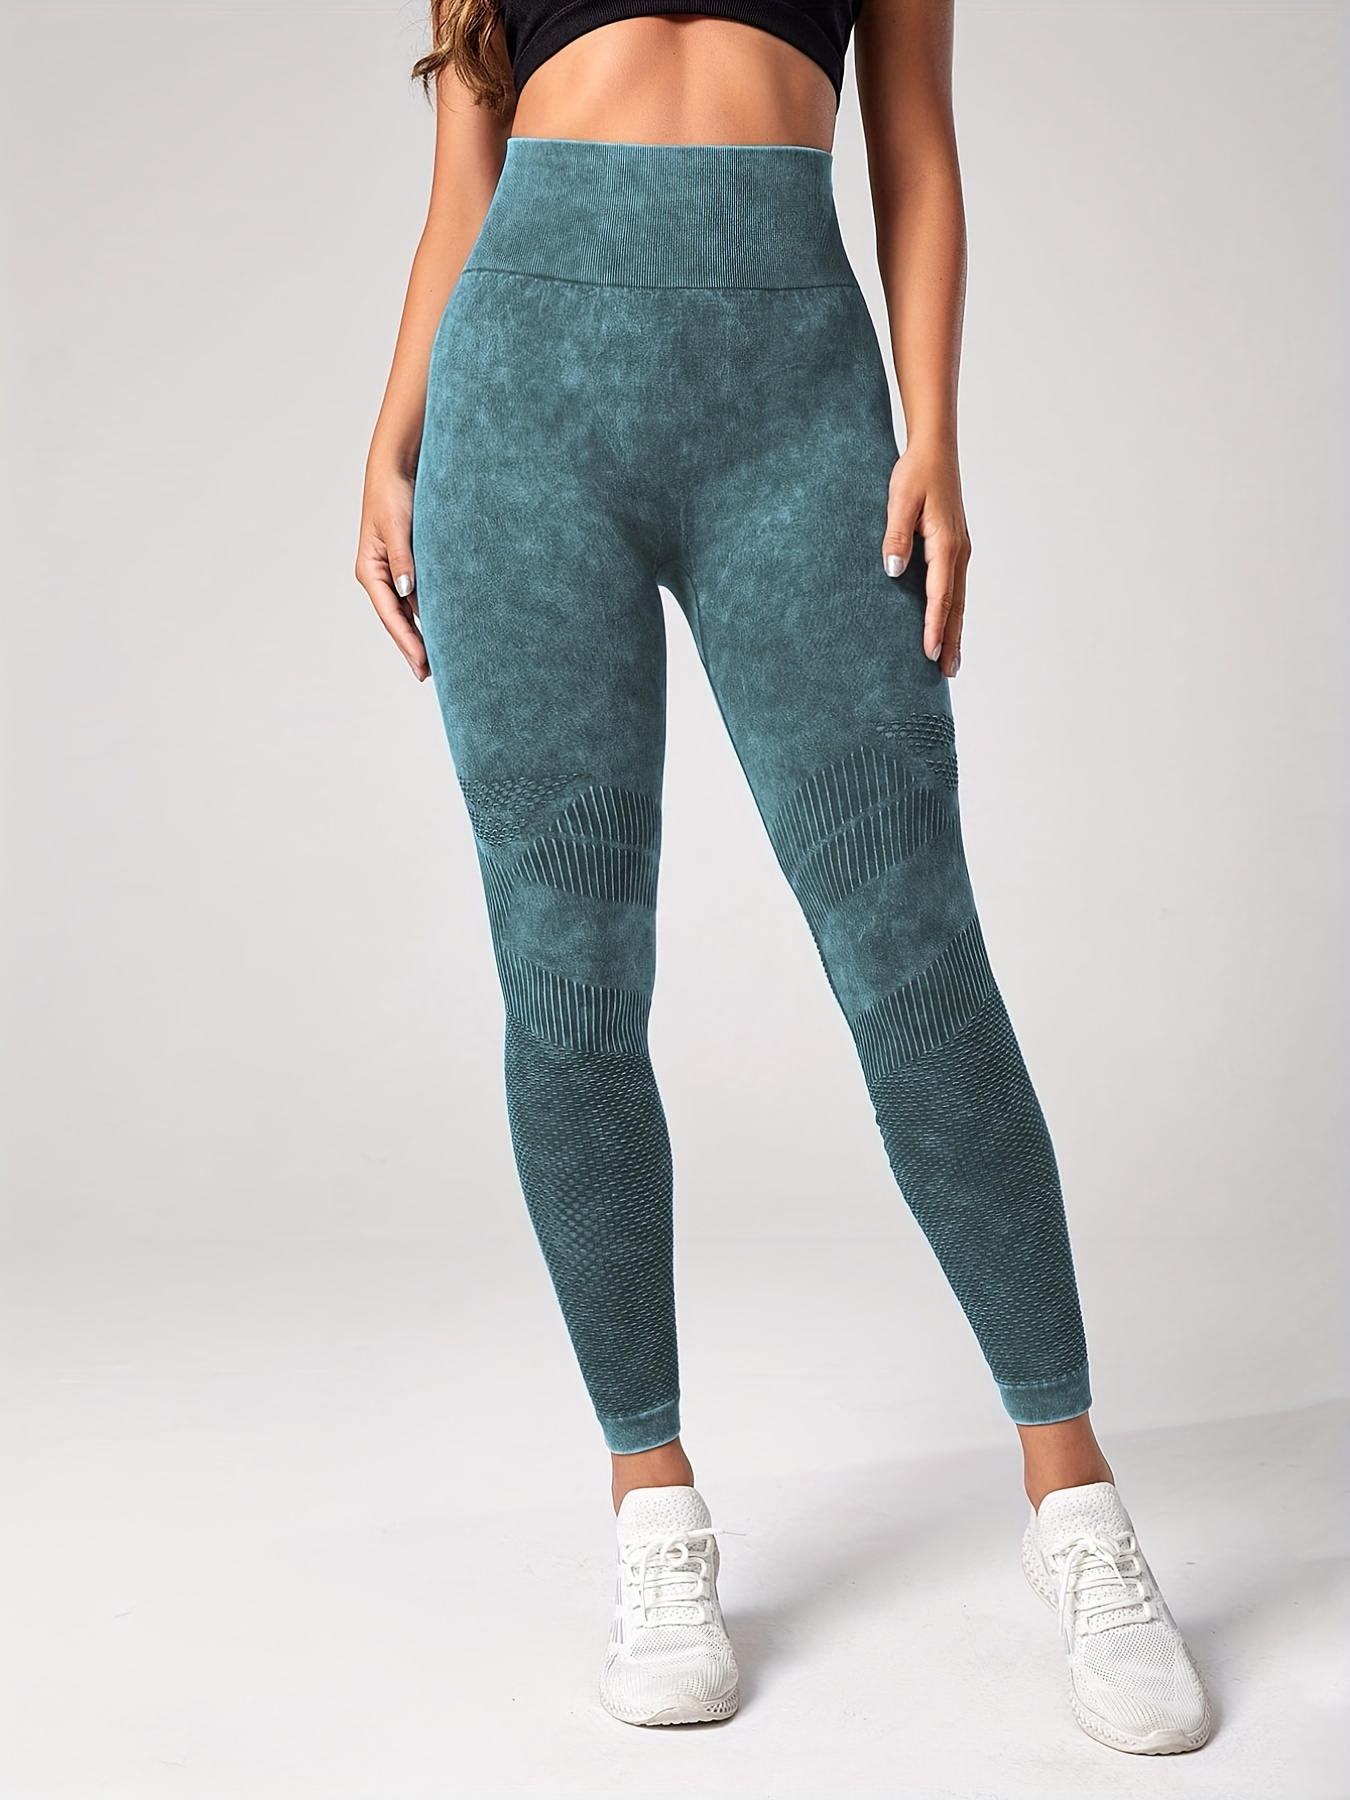 Free People Athleisure Athletic Leggings for Women